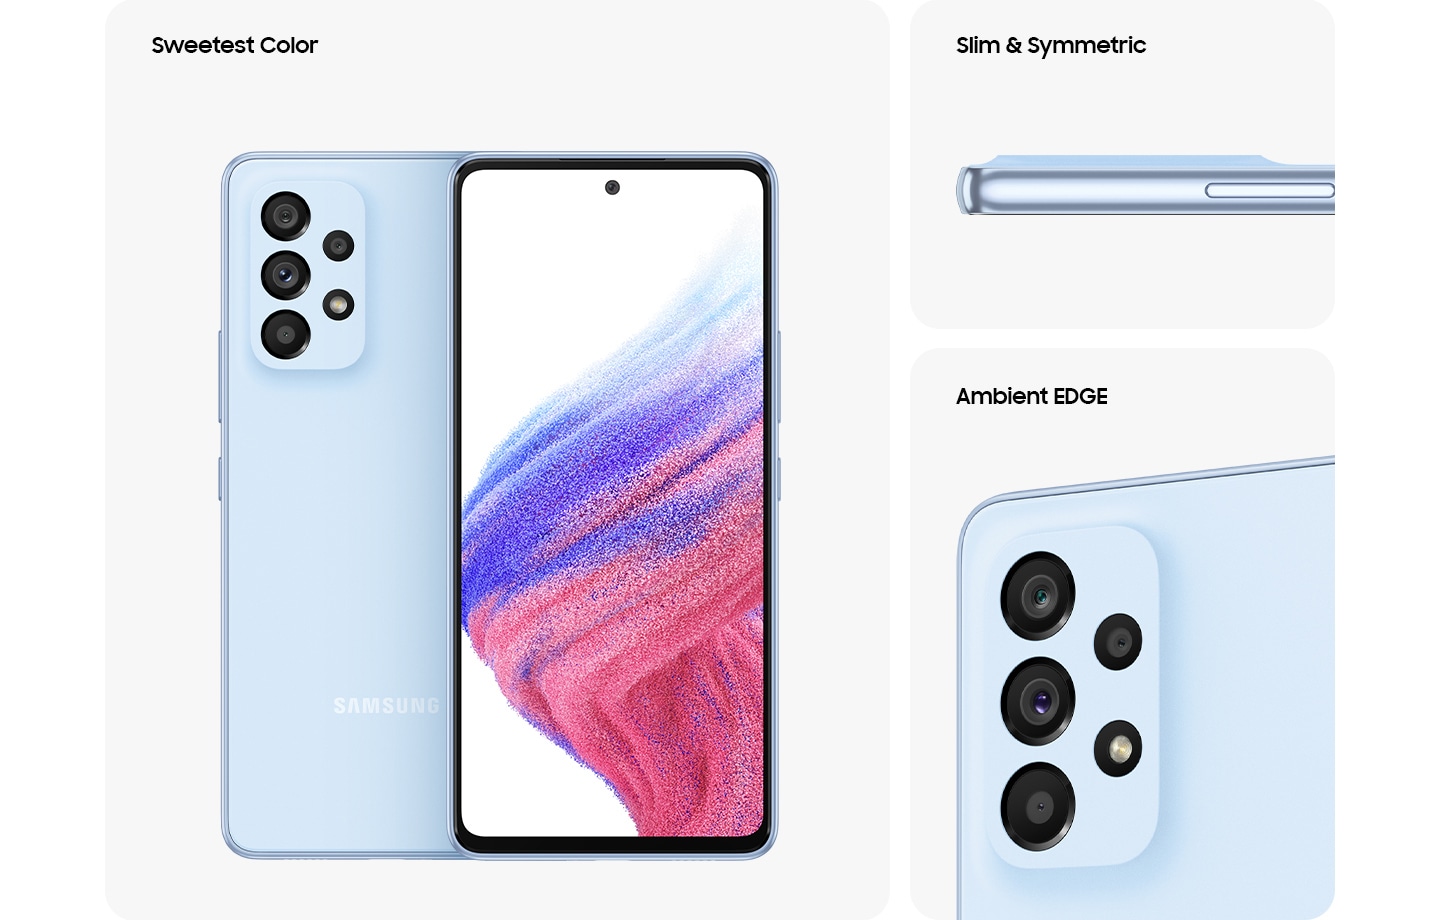 1. Galaxy A53 5G in Awesome Blue, seen from multiple angles to show the design: rear, front, side and close-up on the rear camera. Text saying Sweetest Color, Slim & Symmetric, Ambient EDGE.